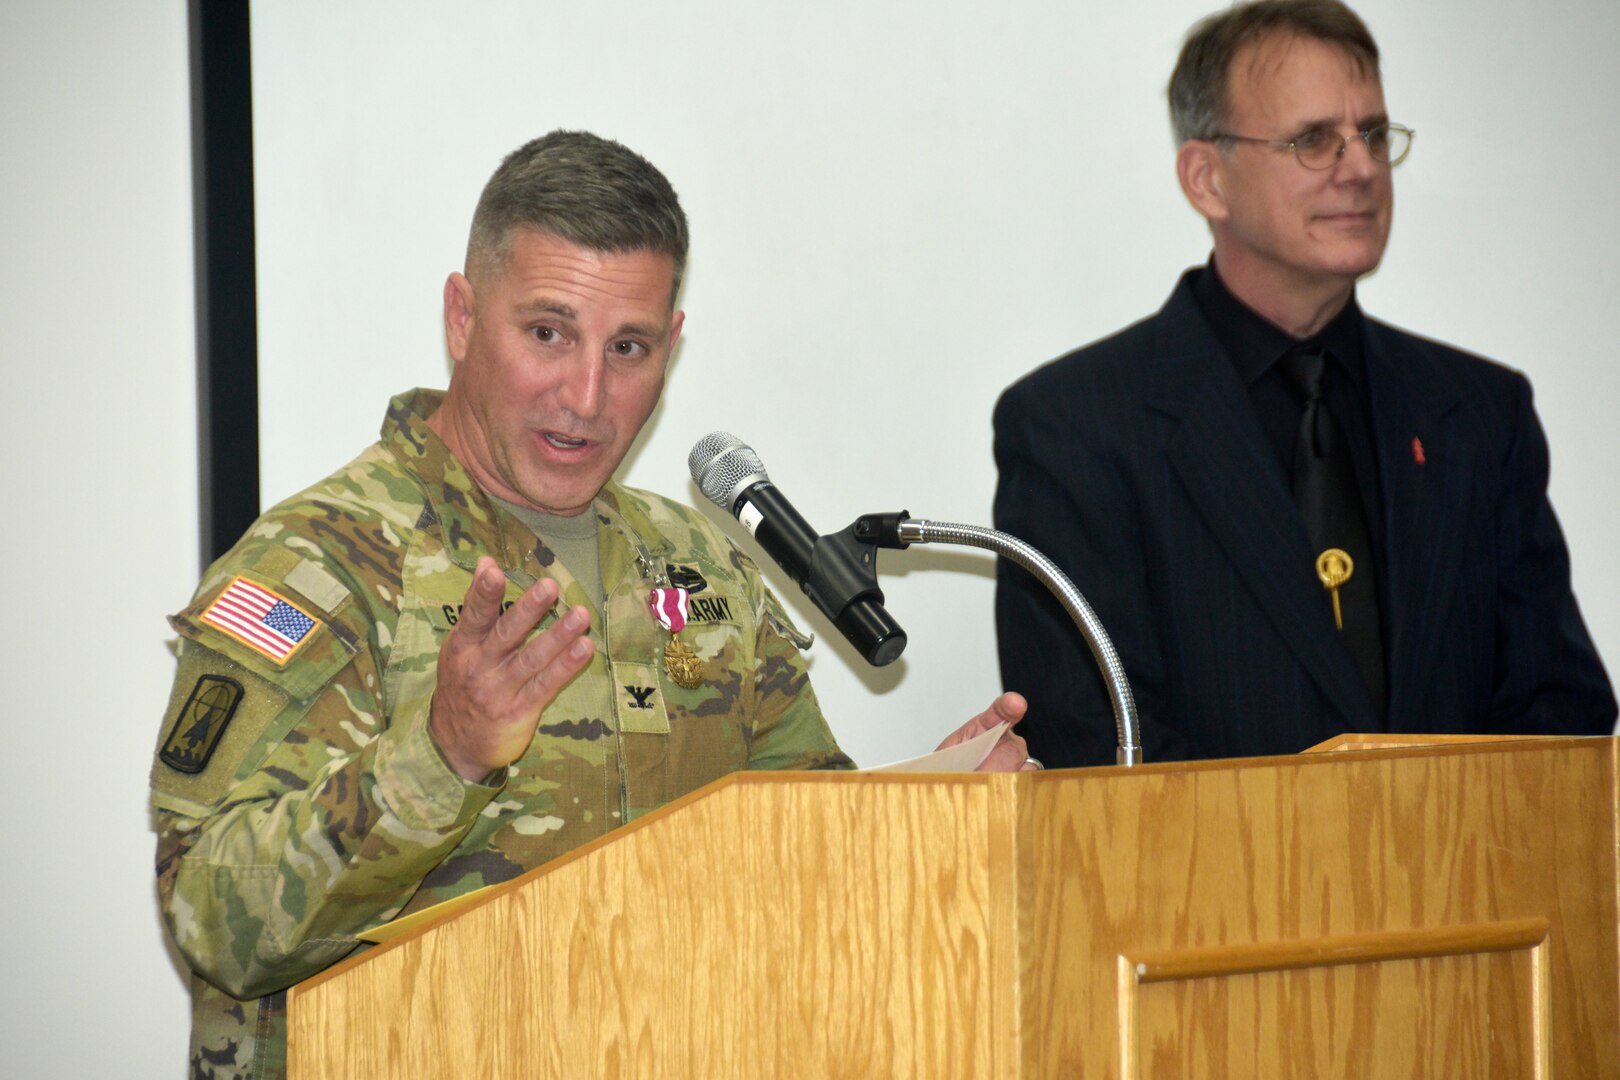 Col. Paul Gapinski offers his last statements as the commander of the Wisconsin Army National Guard’s 426th Regiment during a formal change of command ceremony Oct. 14 at the Wisconsin Military Academy, Fort McCoy, Wis.